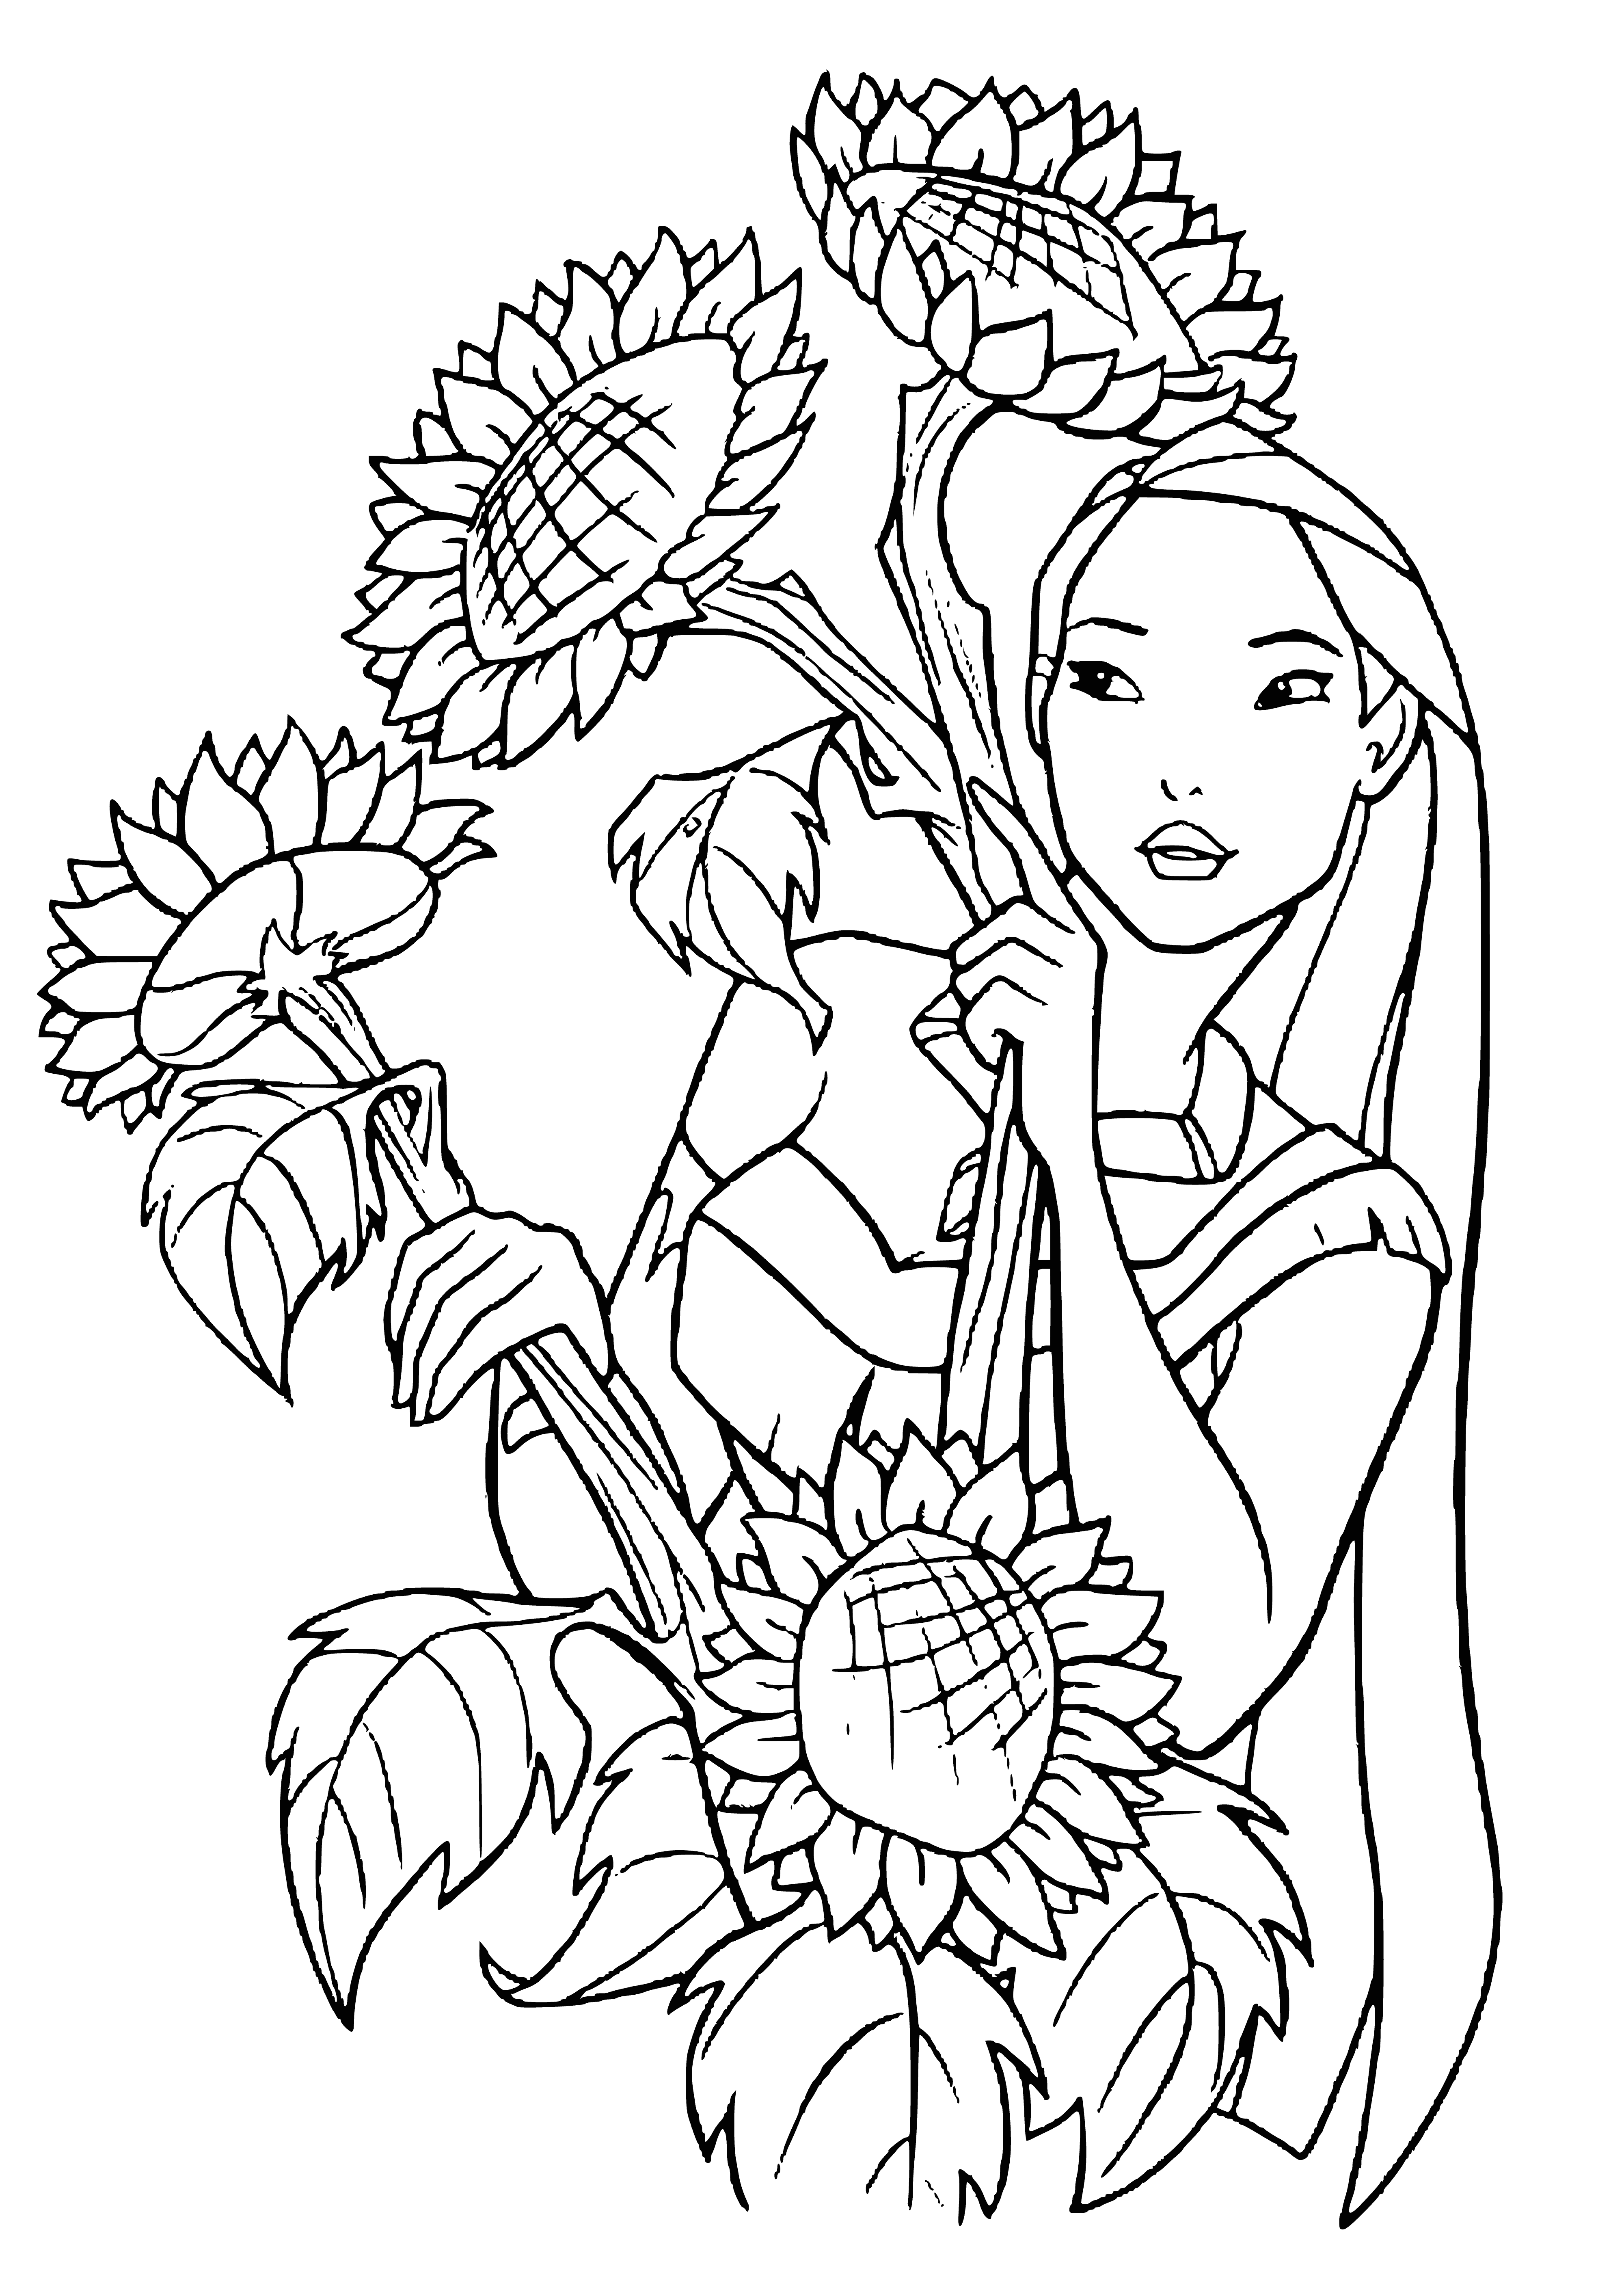 coloring page: Woman in white dress with red/blue designs, holding feather necklace, surrounded by men.